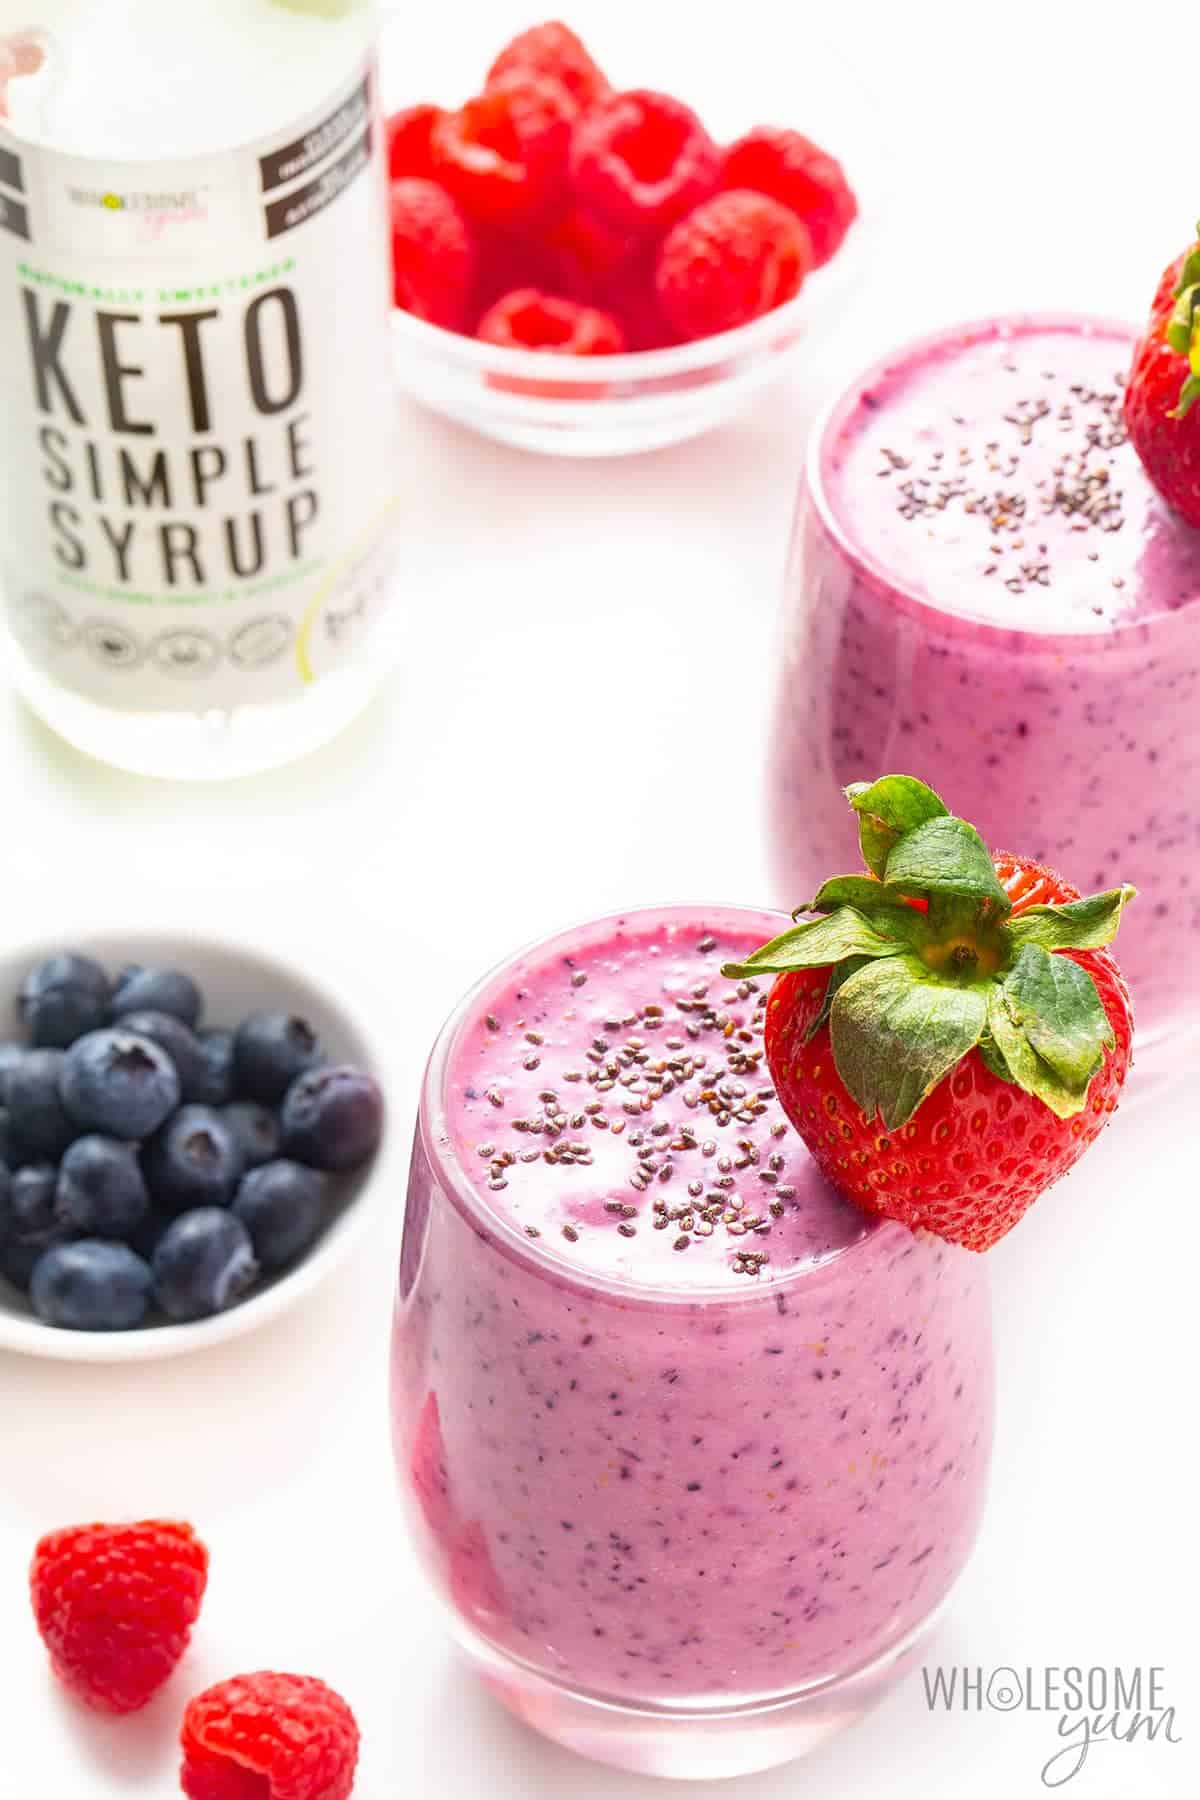 Low carb protein shake with keto simple syrup.